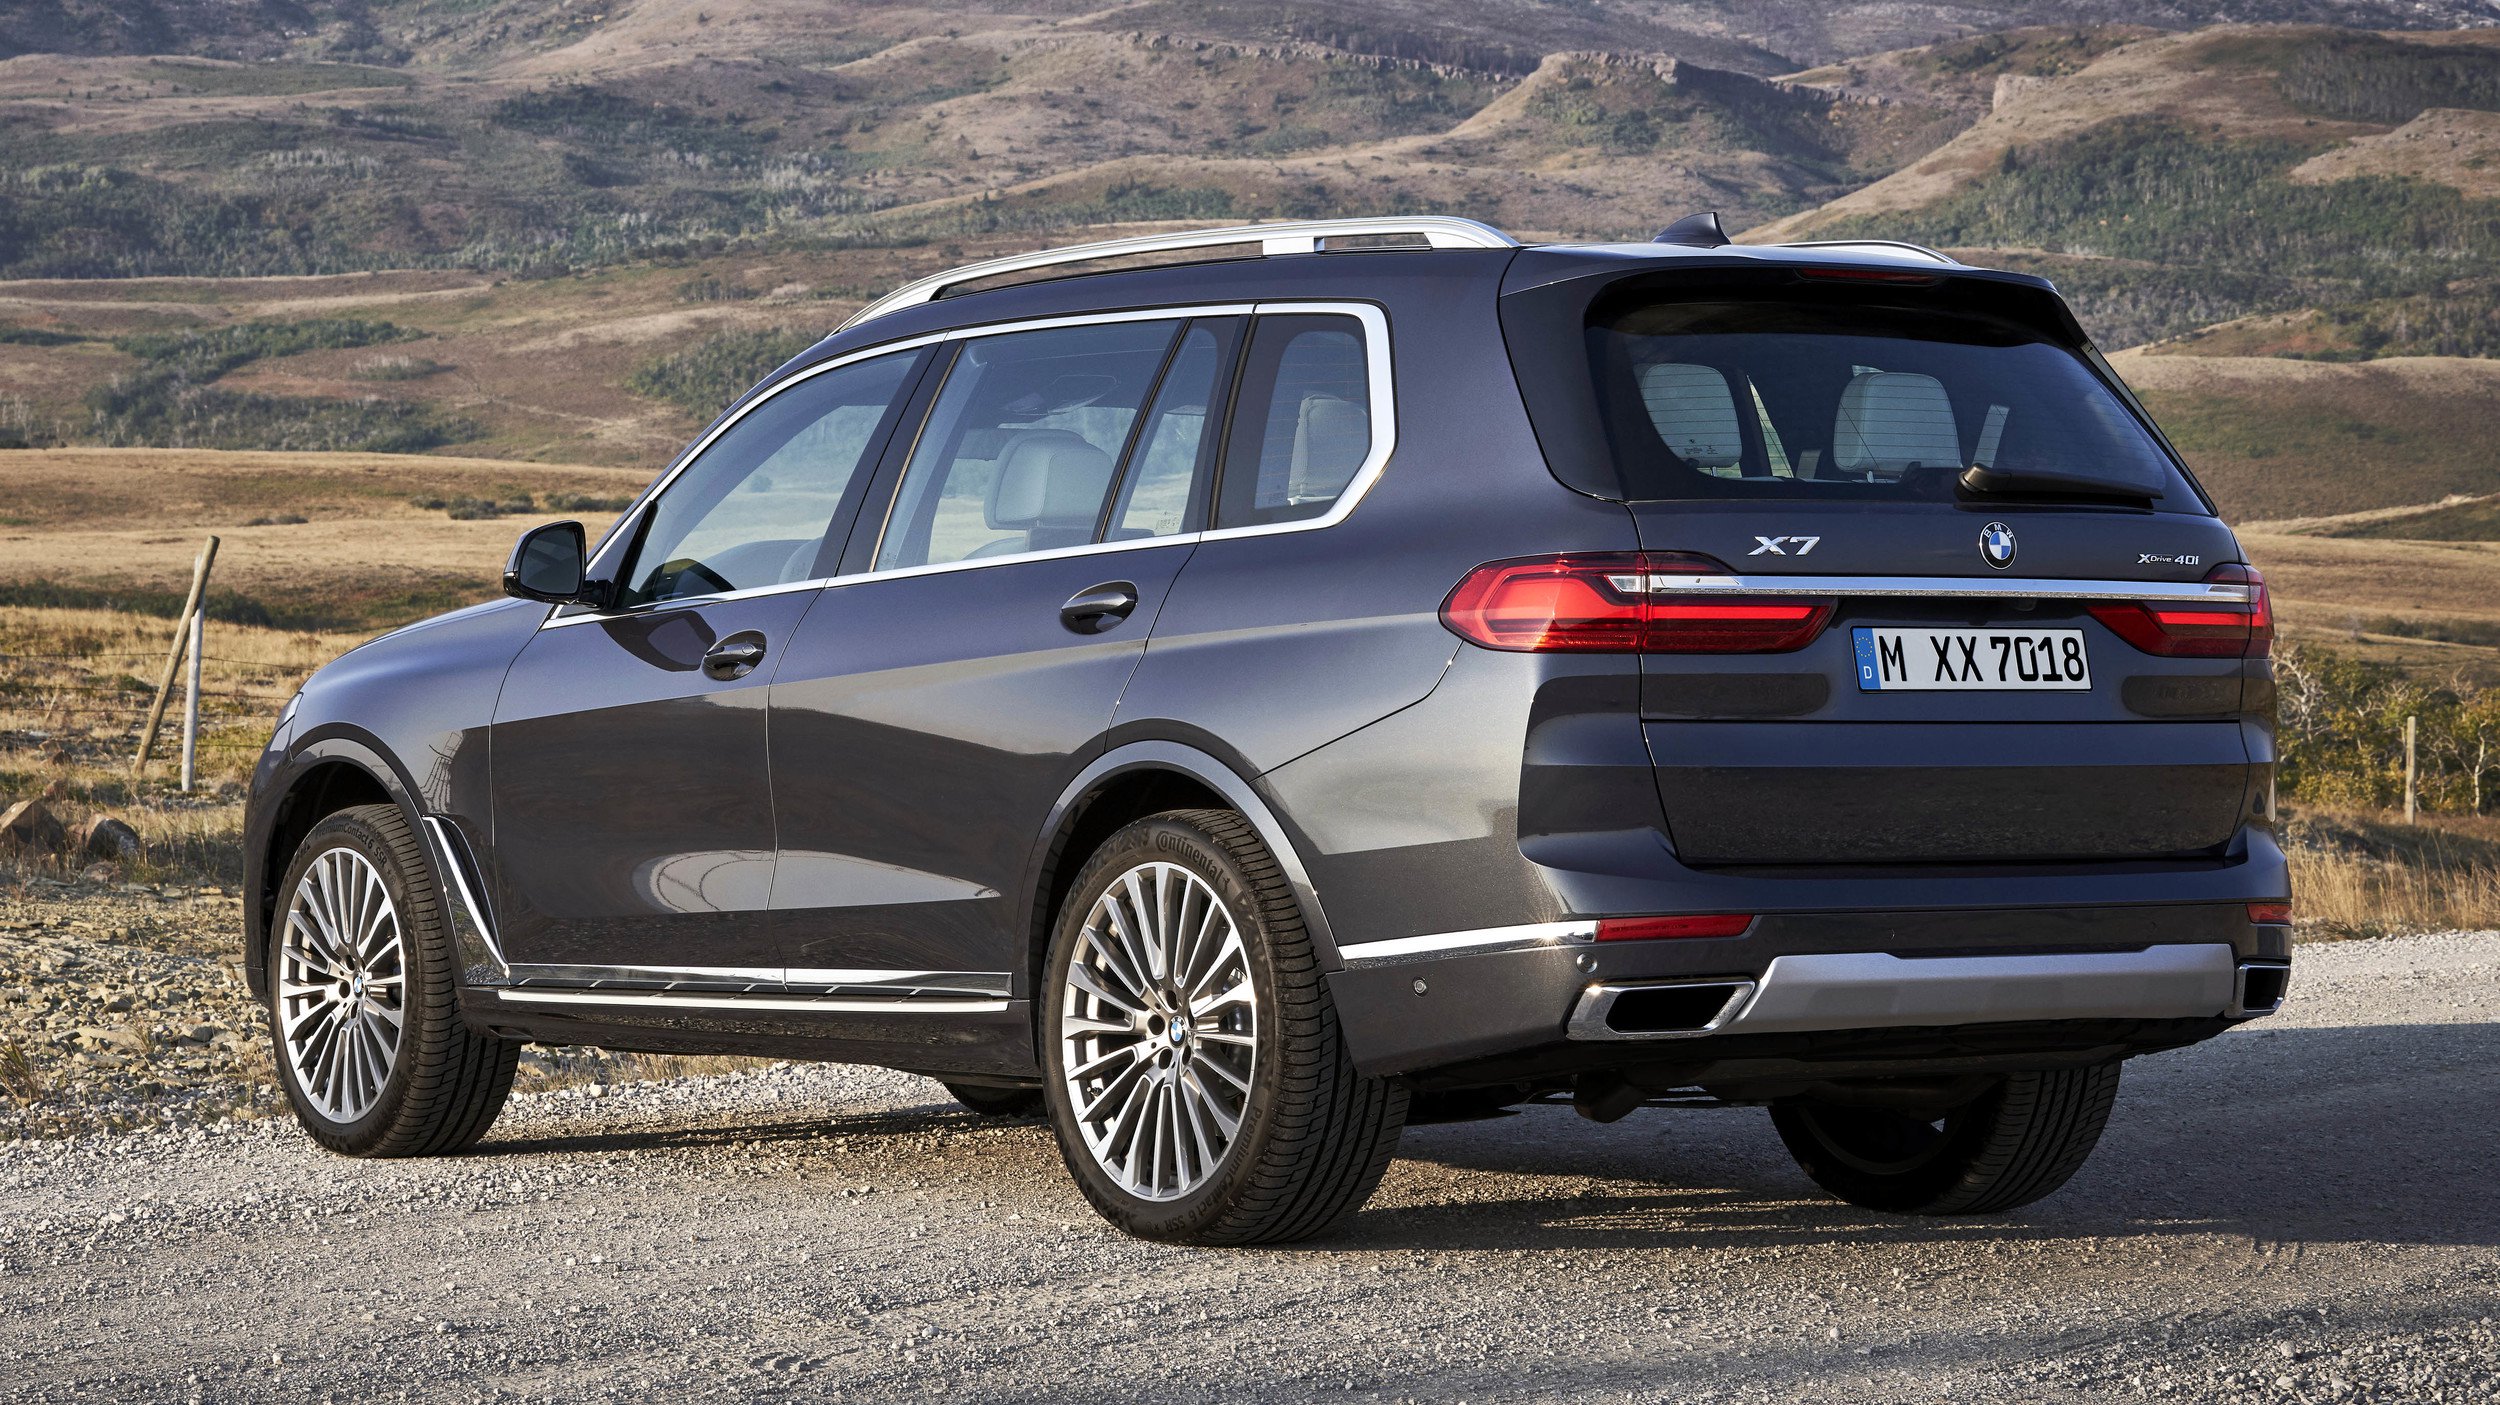 Bmw X7 HD Image And Photossmall Cars Wallpaper